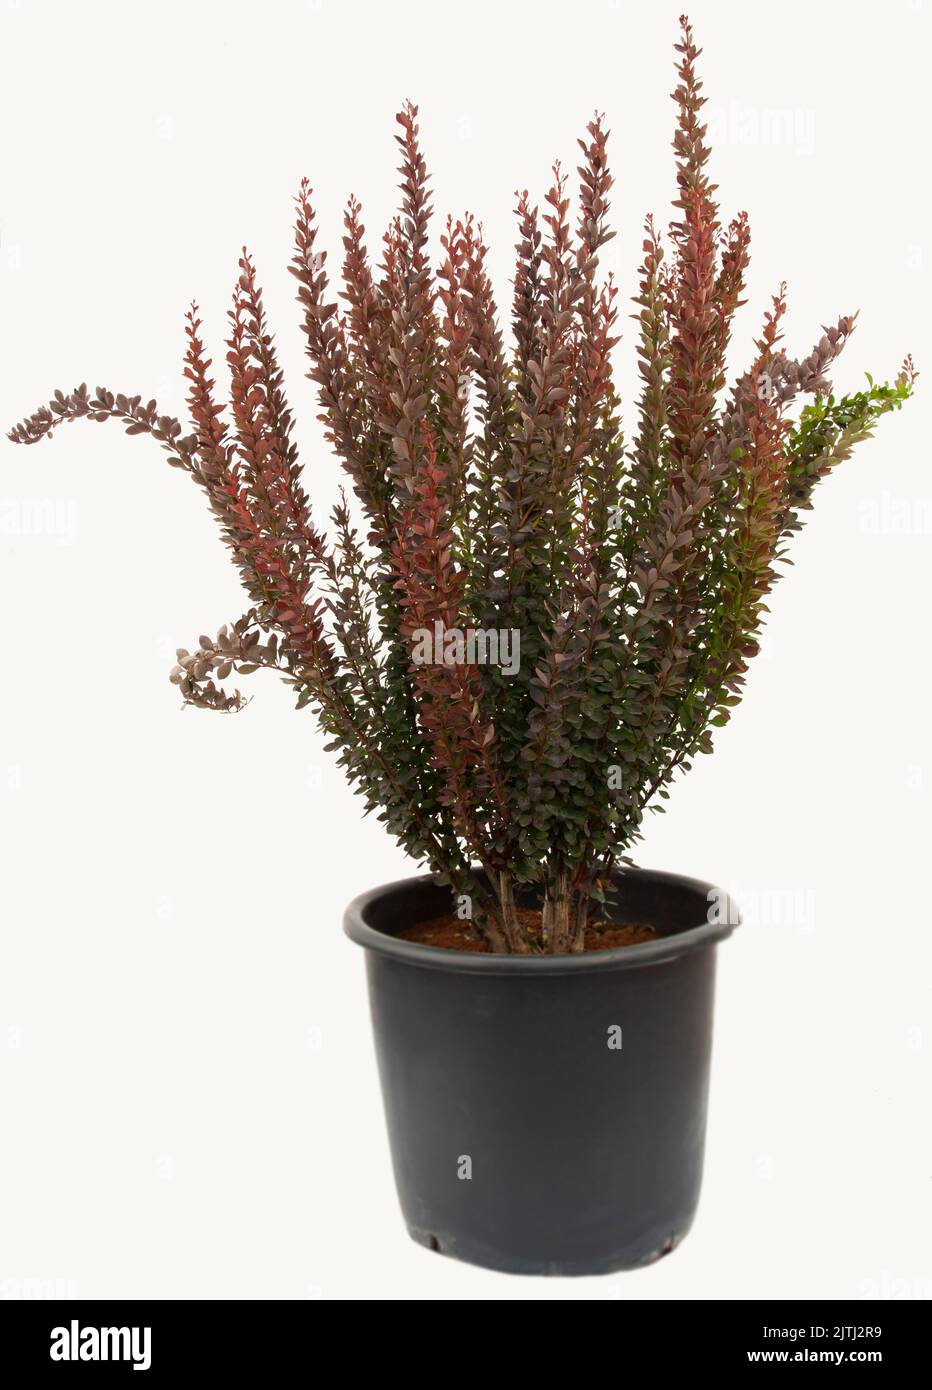 Berberis red rocet plant in flowerpot on isolated white background, selective focus shot. Stock Photo